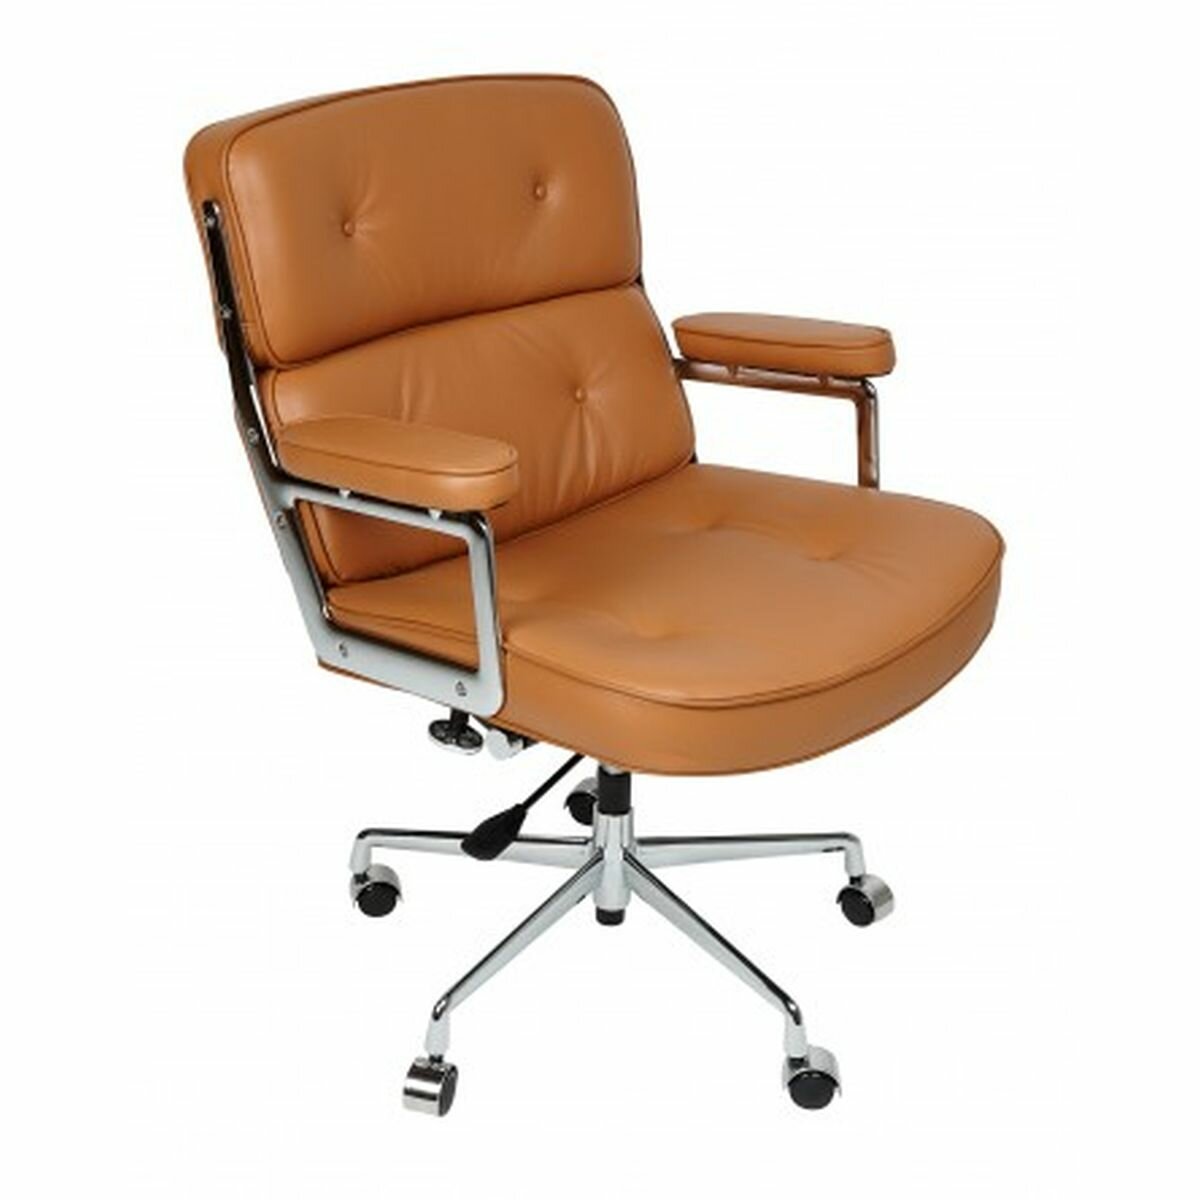 Tihomir Mid Century Double Paded Executive Chair